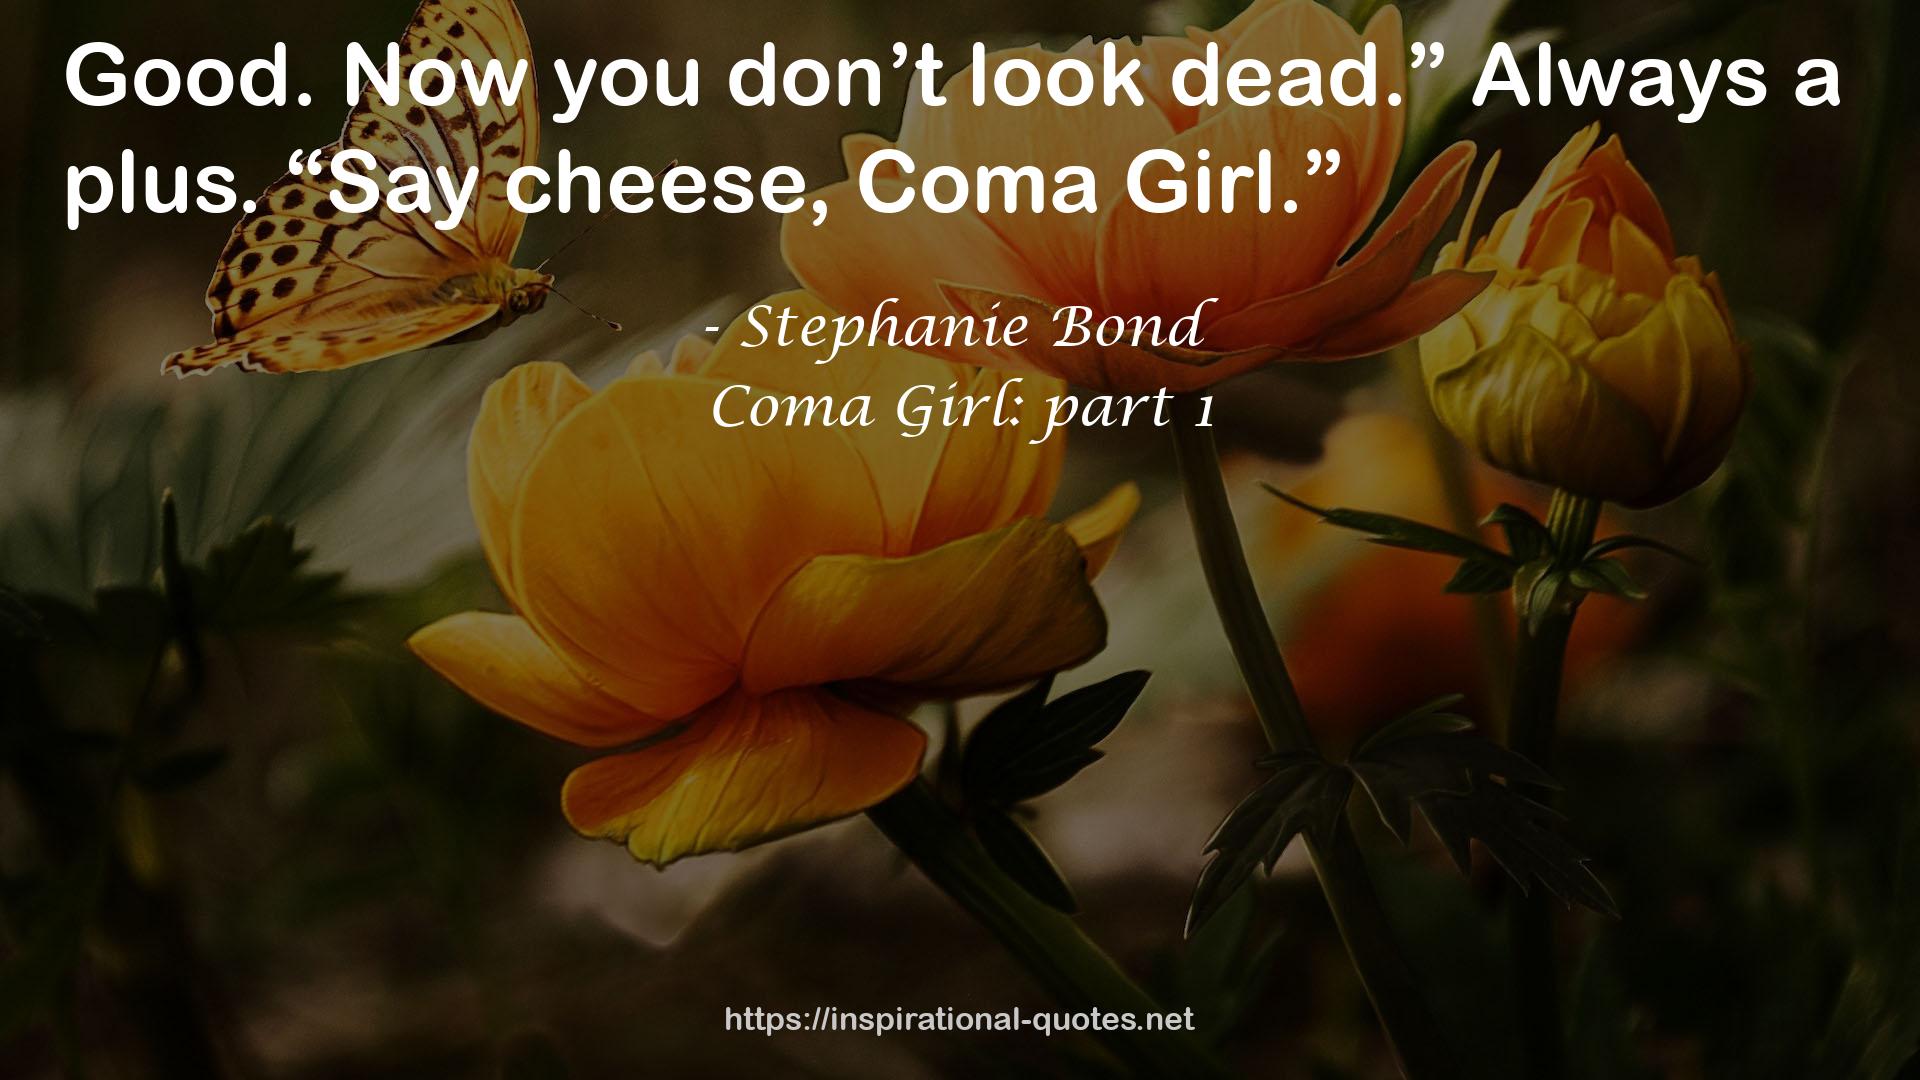 Coma Girl: part 1 QUOTES